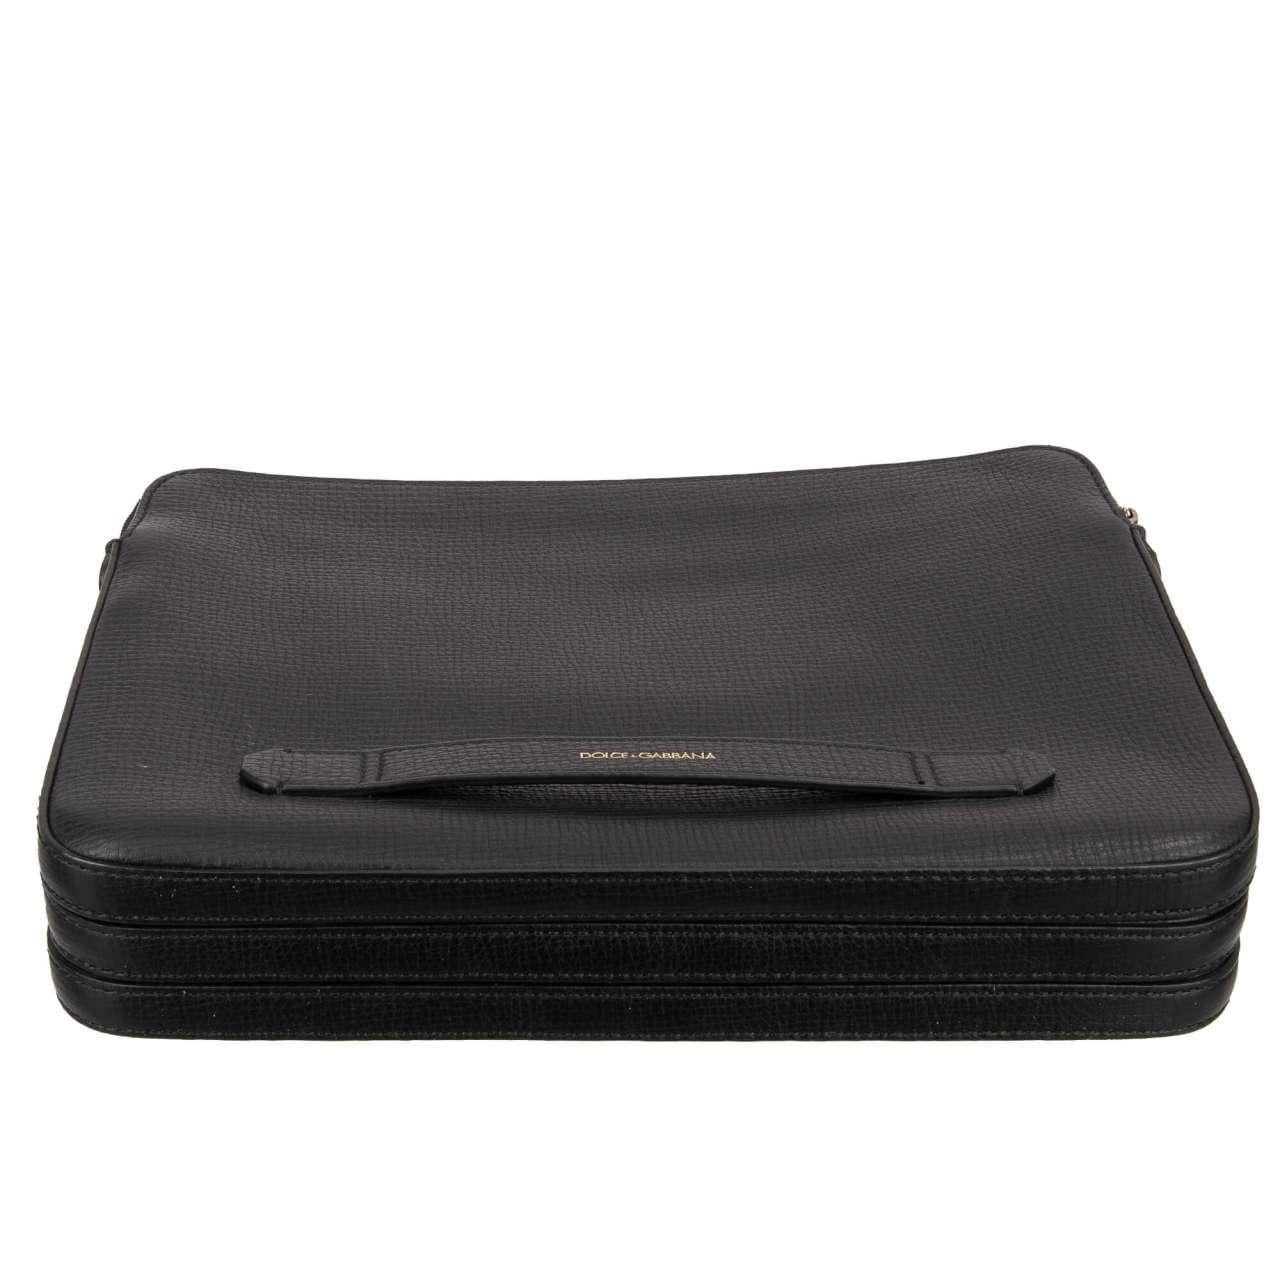 D&G - Palmellato Leather Pouch Briefcase with 3 compartments and Logo Black For Sale 2